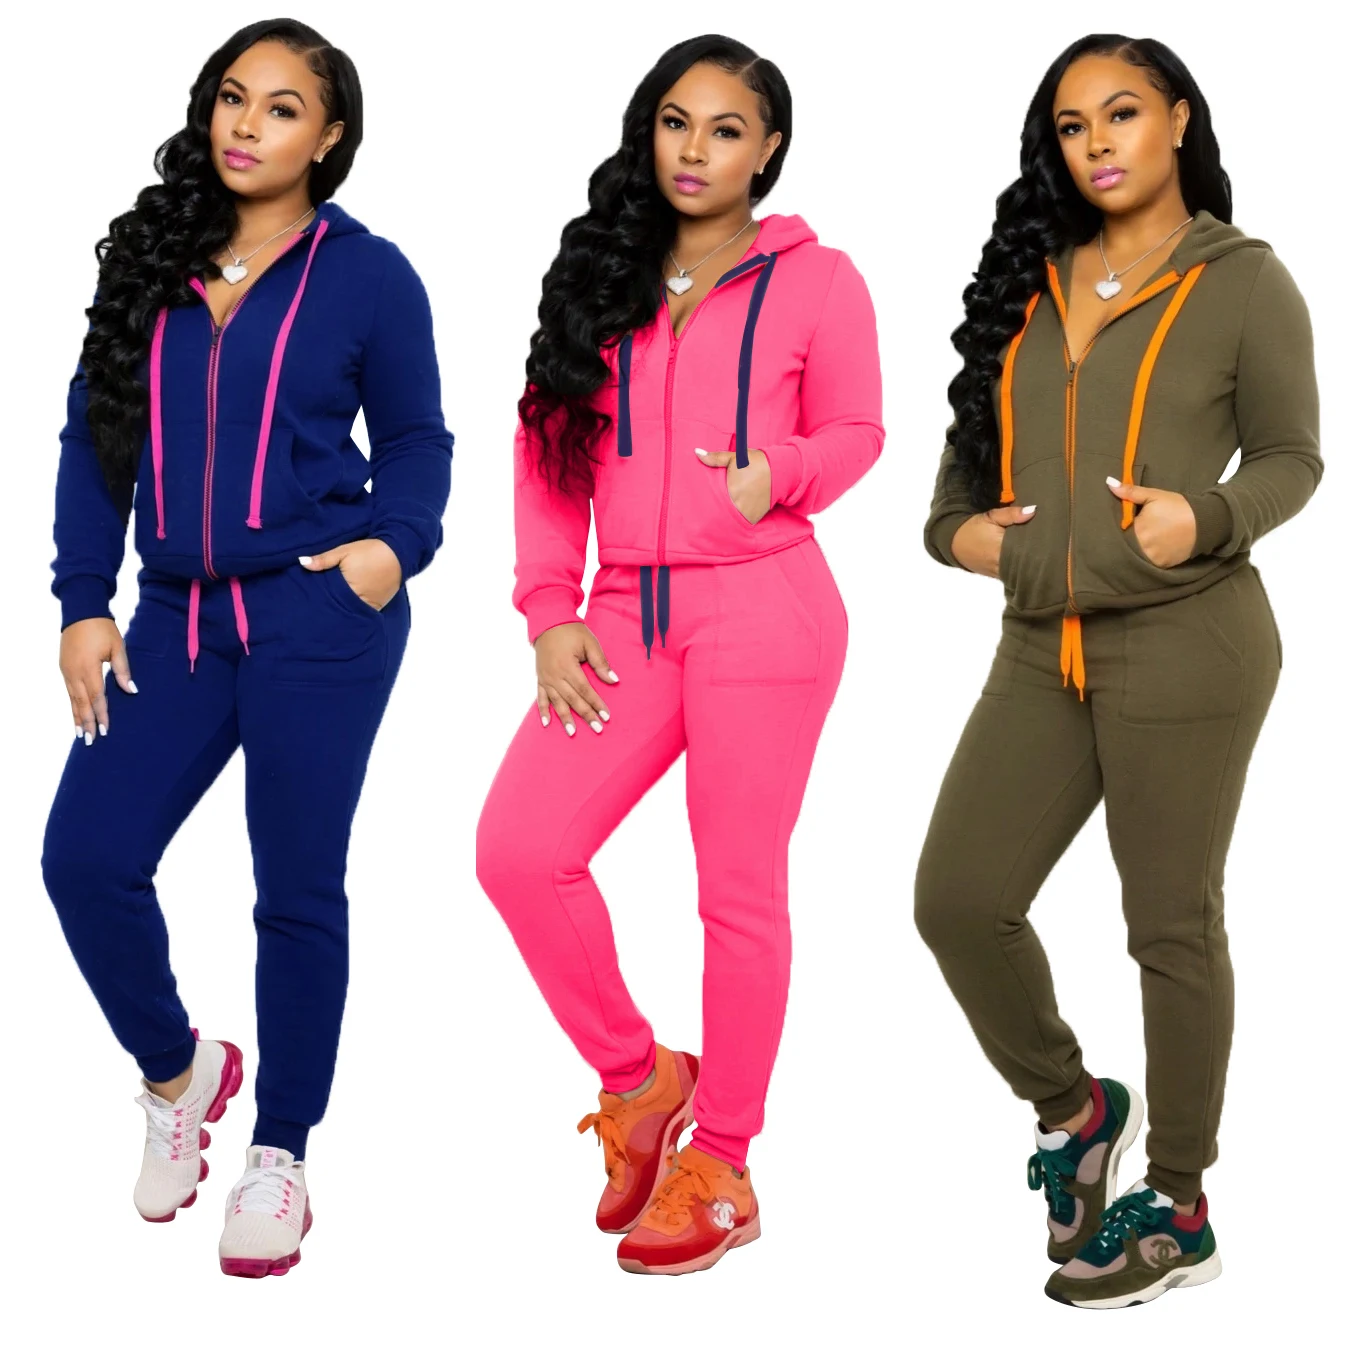 

Foma--YM-8563 2020 Winter outfits women two pieces sets with pocket sport wear long sleeve hoodies pants women, As pictures